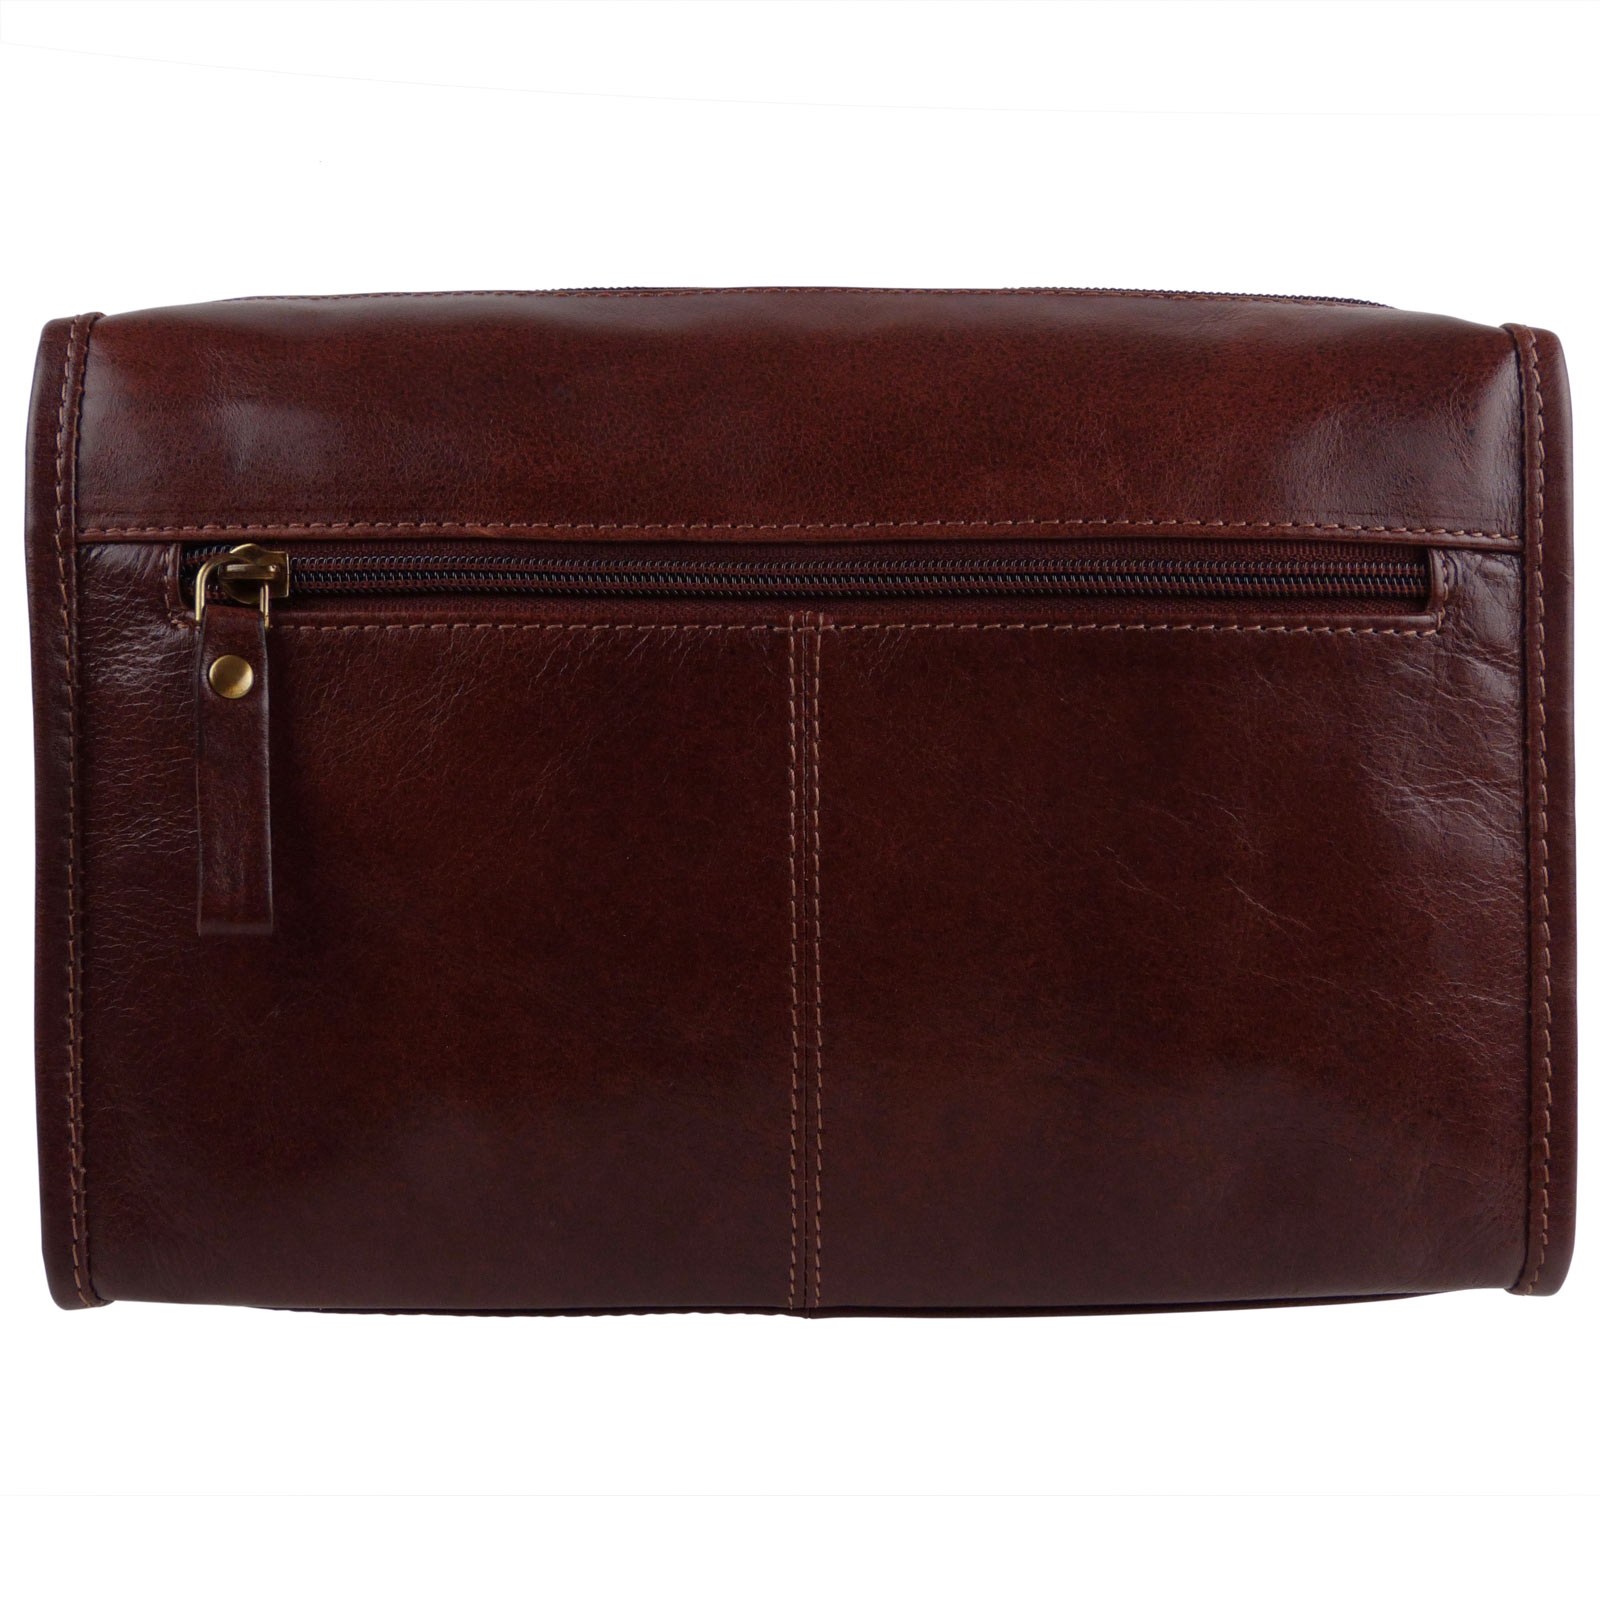 NEW Prime Hide Mens Dark Brown Leather Wash Bag Toiletry Bag Travel Pouch 